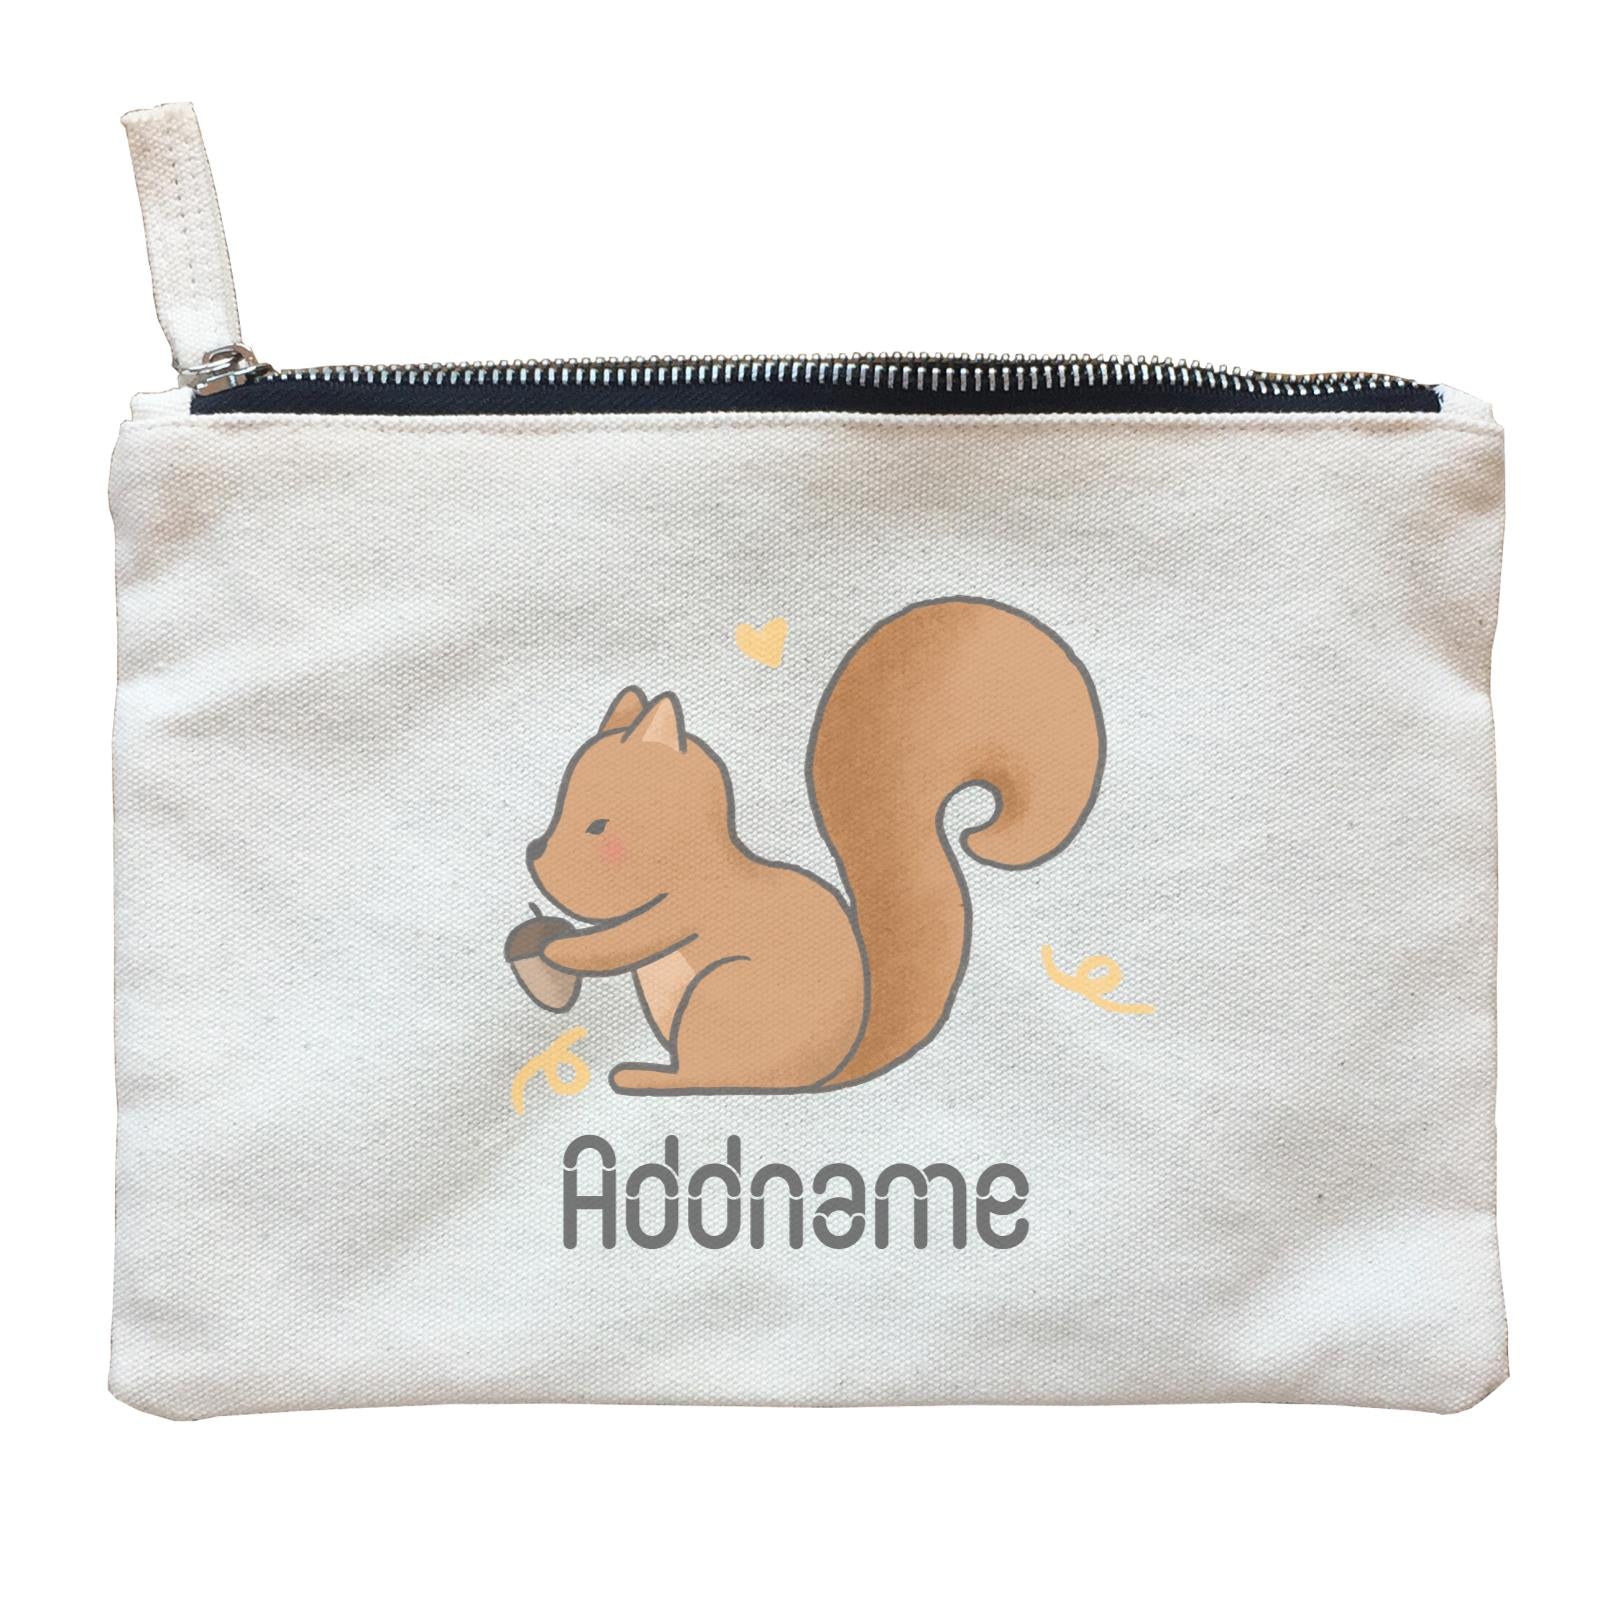 Cute Hand Drawn Style Squirrel Addname Zipper Pouch